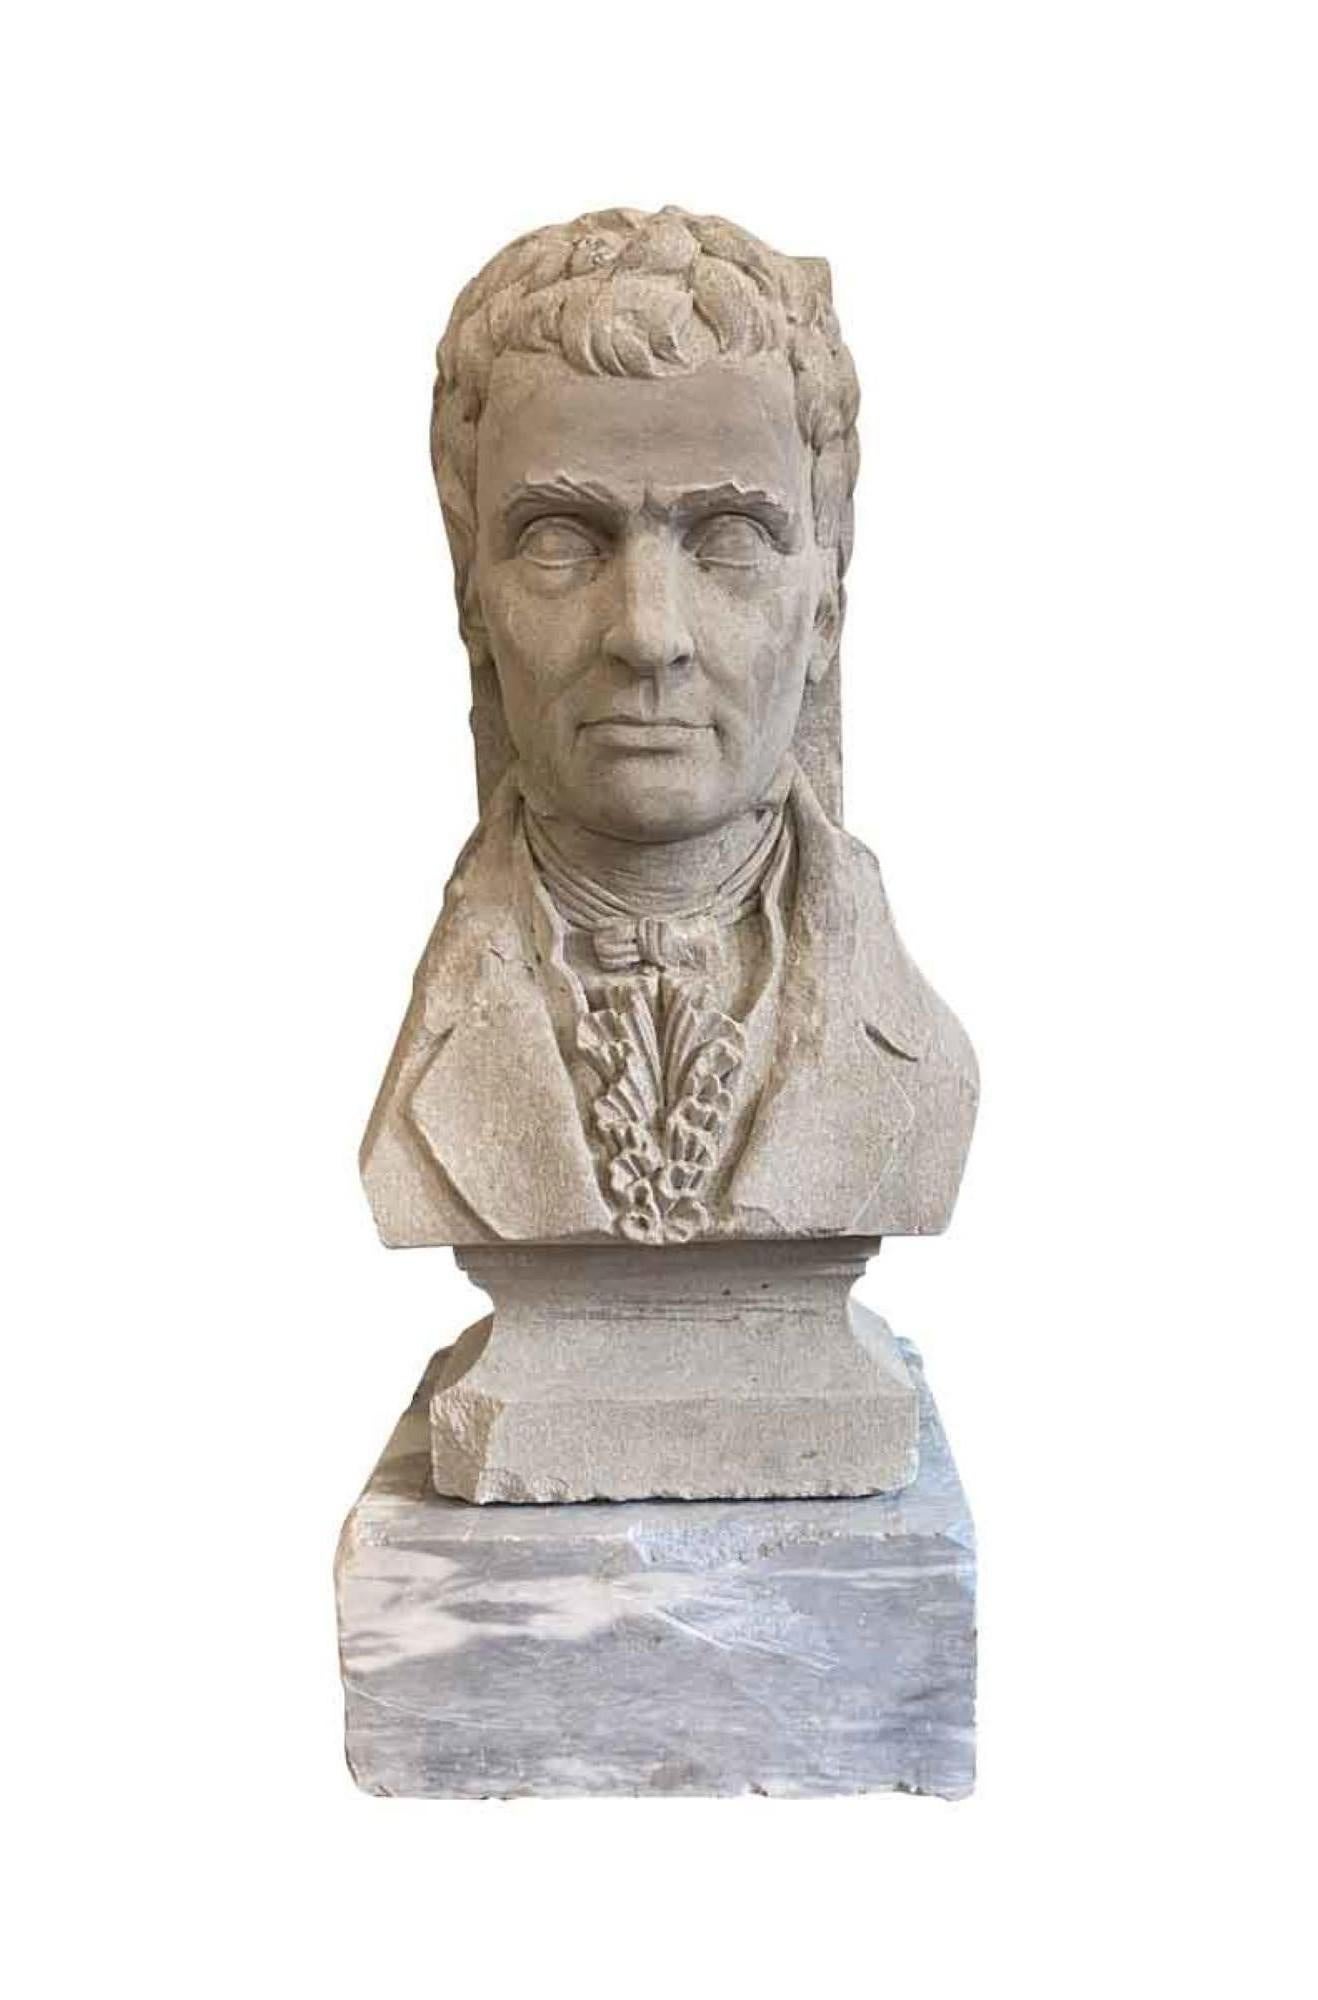 This 1931 stately hand carved bust carved in limestone is of Robert Fulton (Nov. 14, 1765 - Feb. 25, 1815) who was an engineer and inventor, especially known for developing the Steamboat and was influential in our water transportation system. Carved